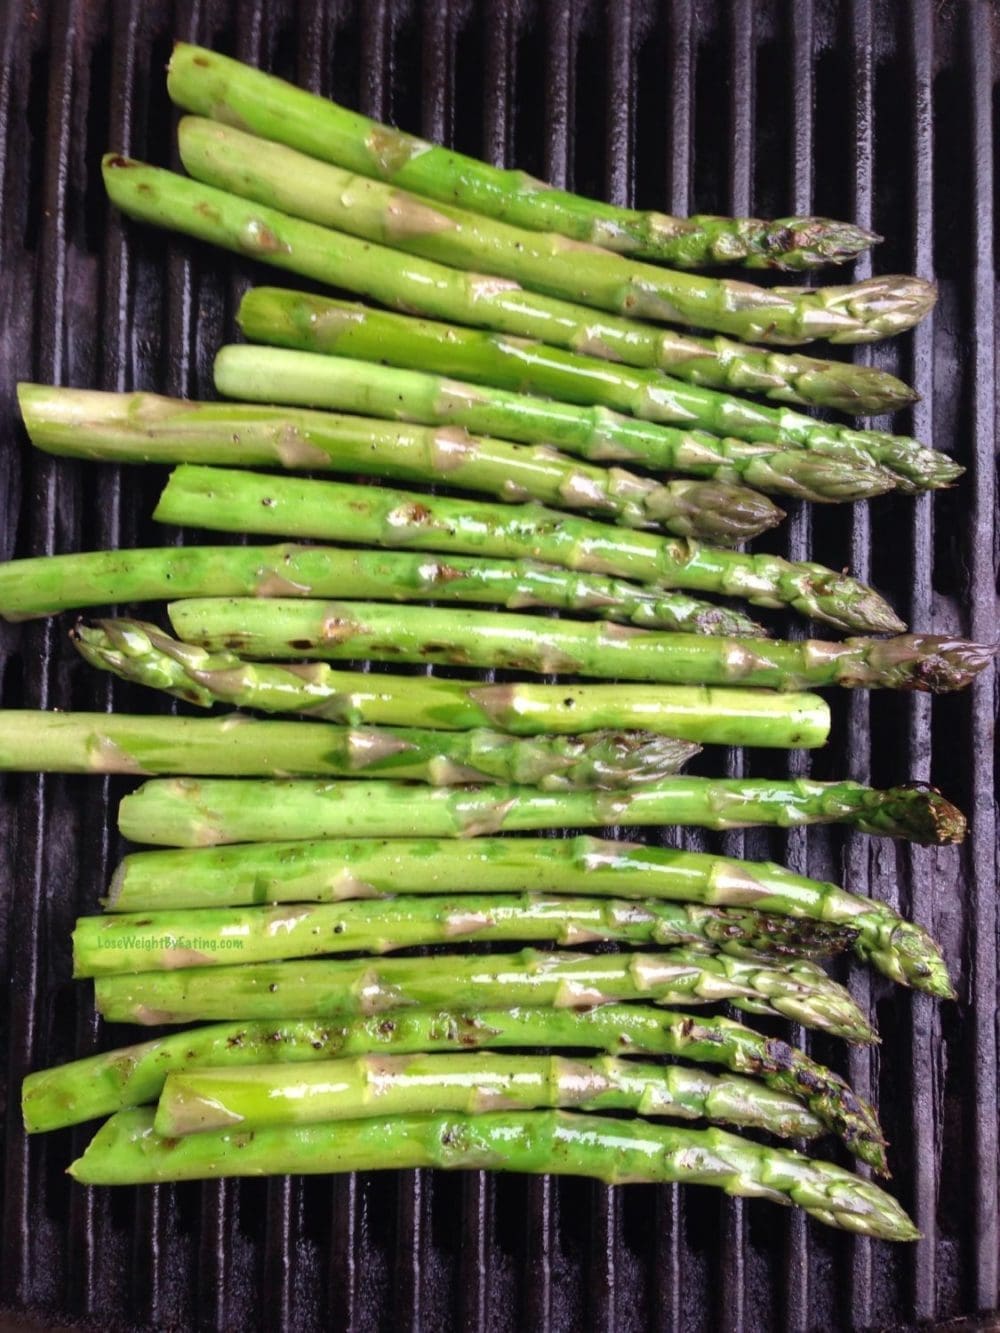 Perfect Asparagus on the Grill BBQ Asparagus Recipe - 10 Easy Sides for Burgers